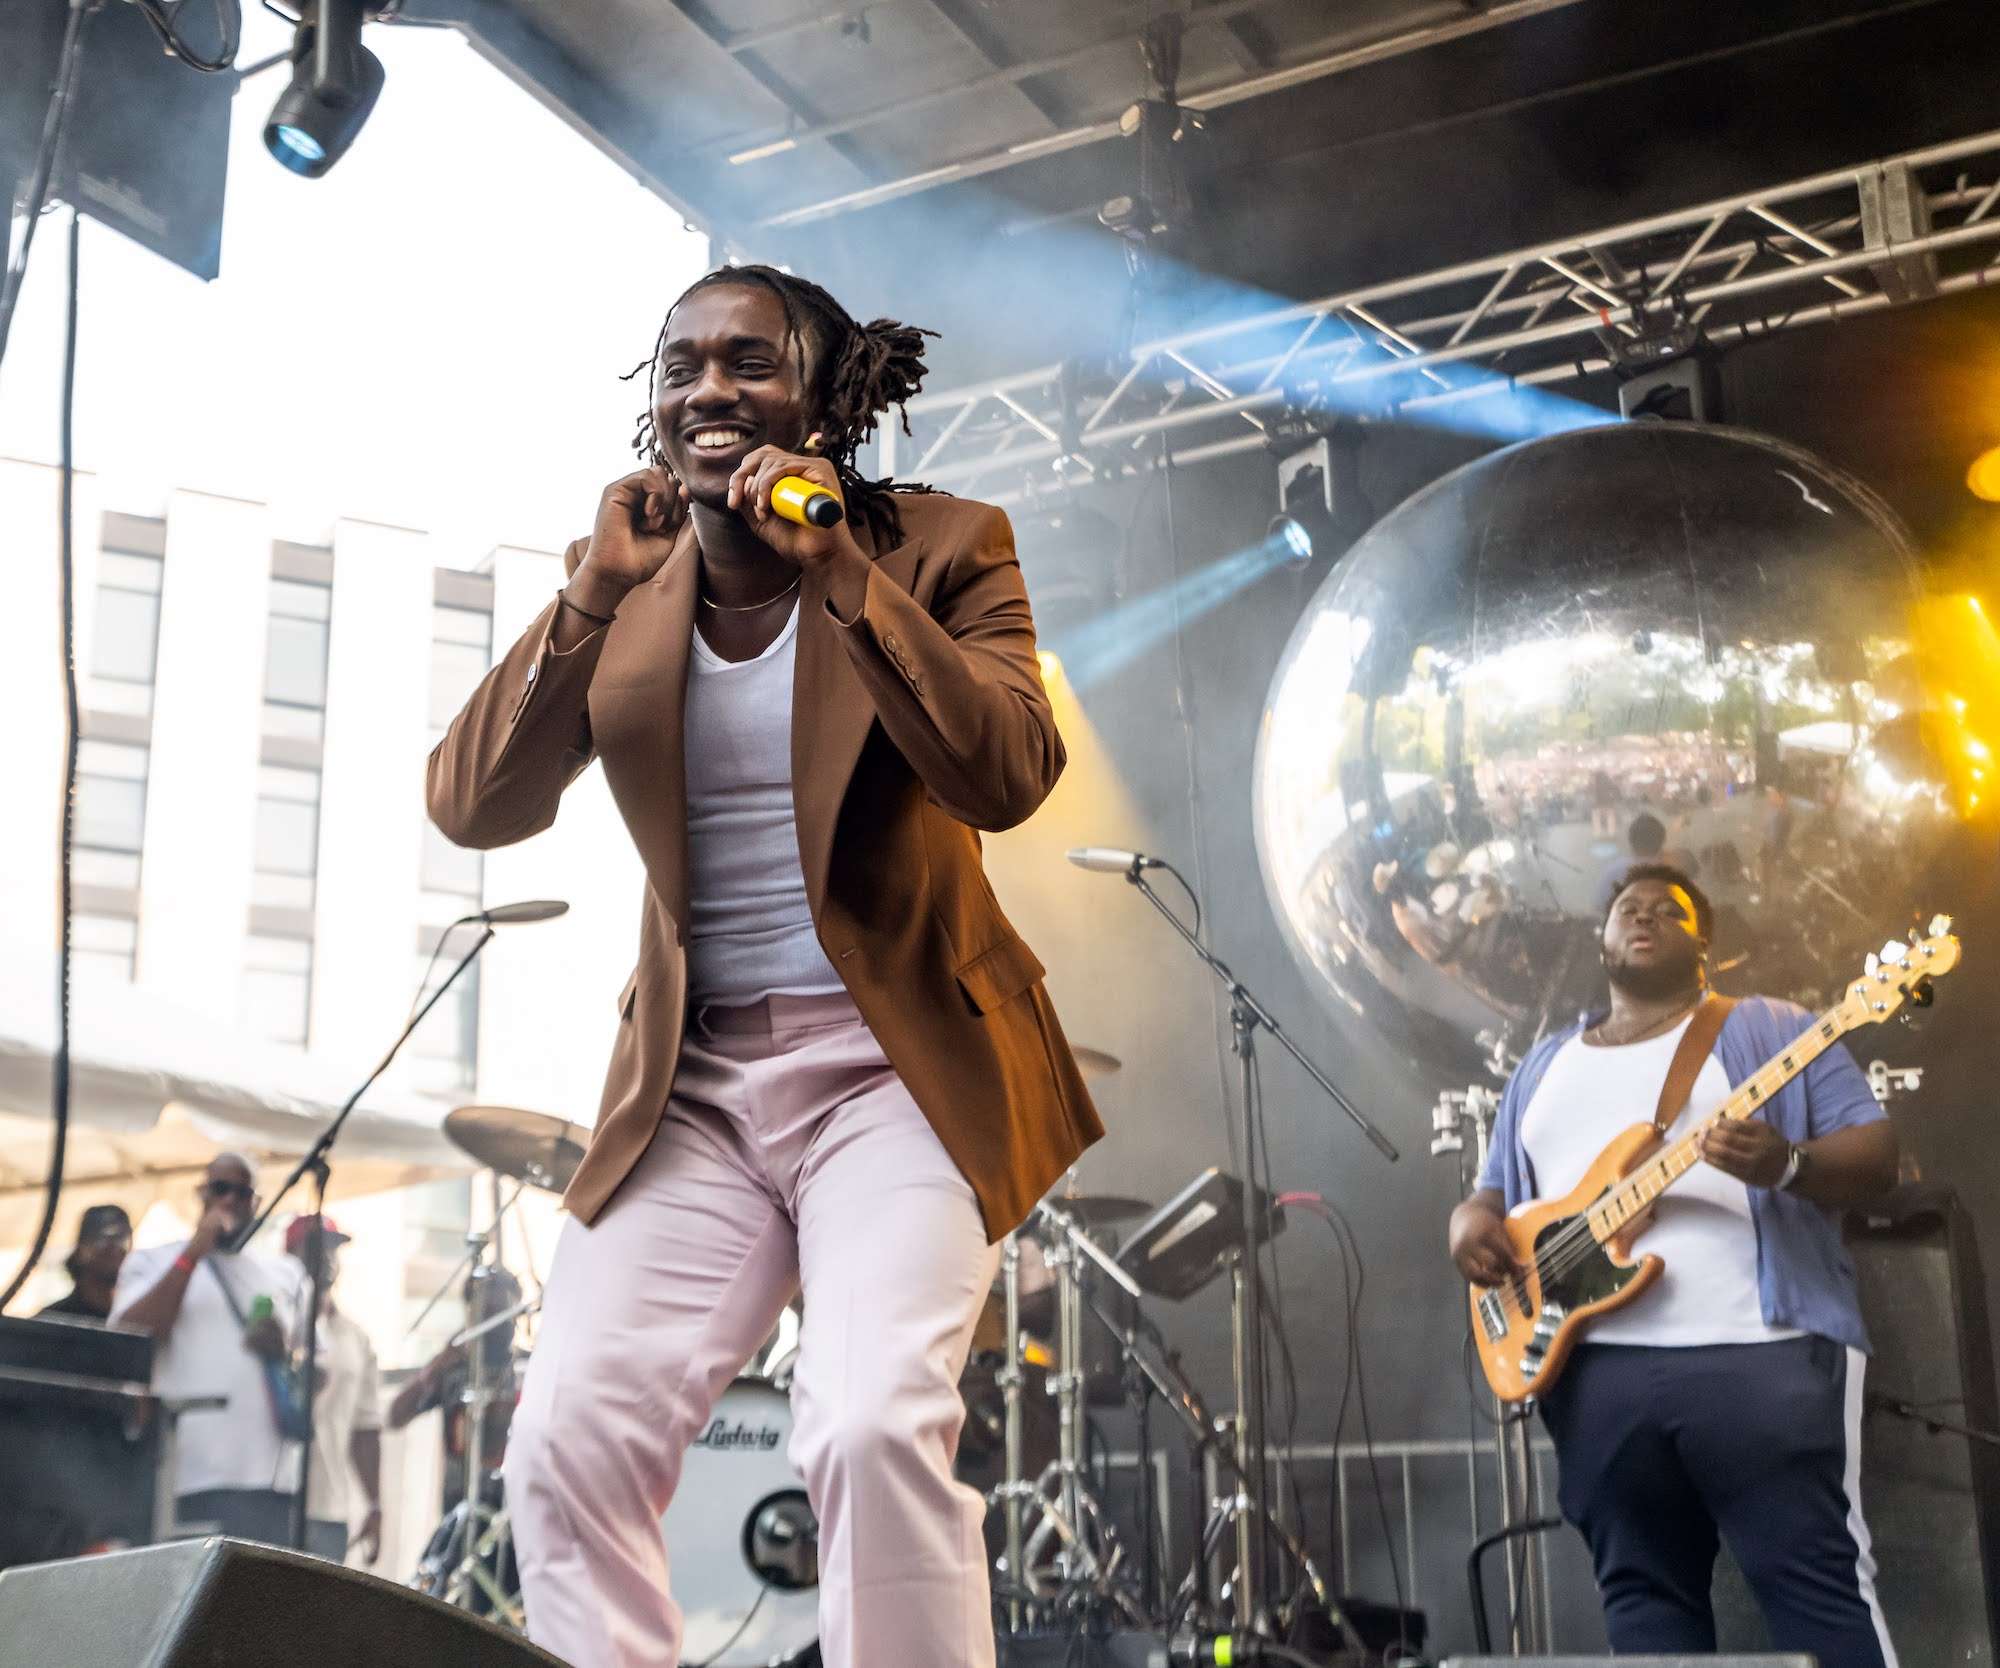 Ric Wilson Live At Pitchfork [GALLERY] 6